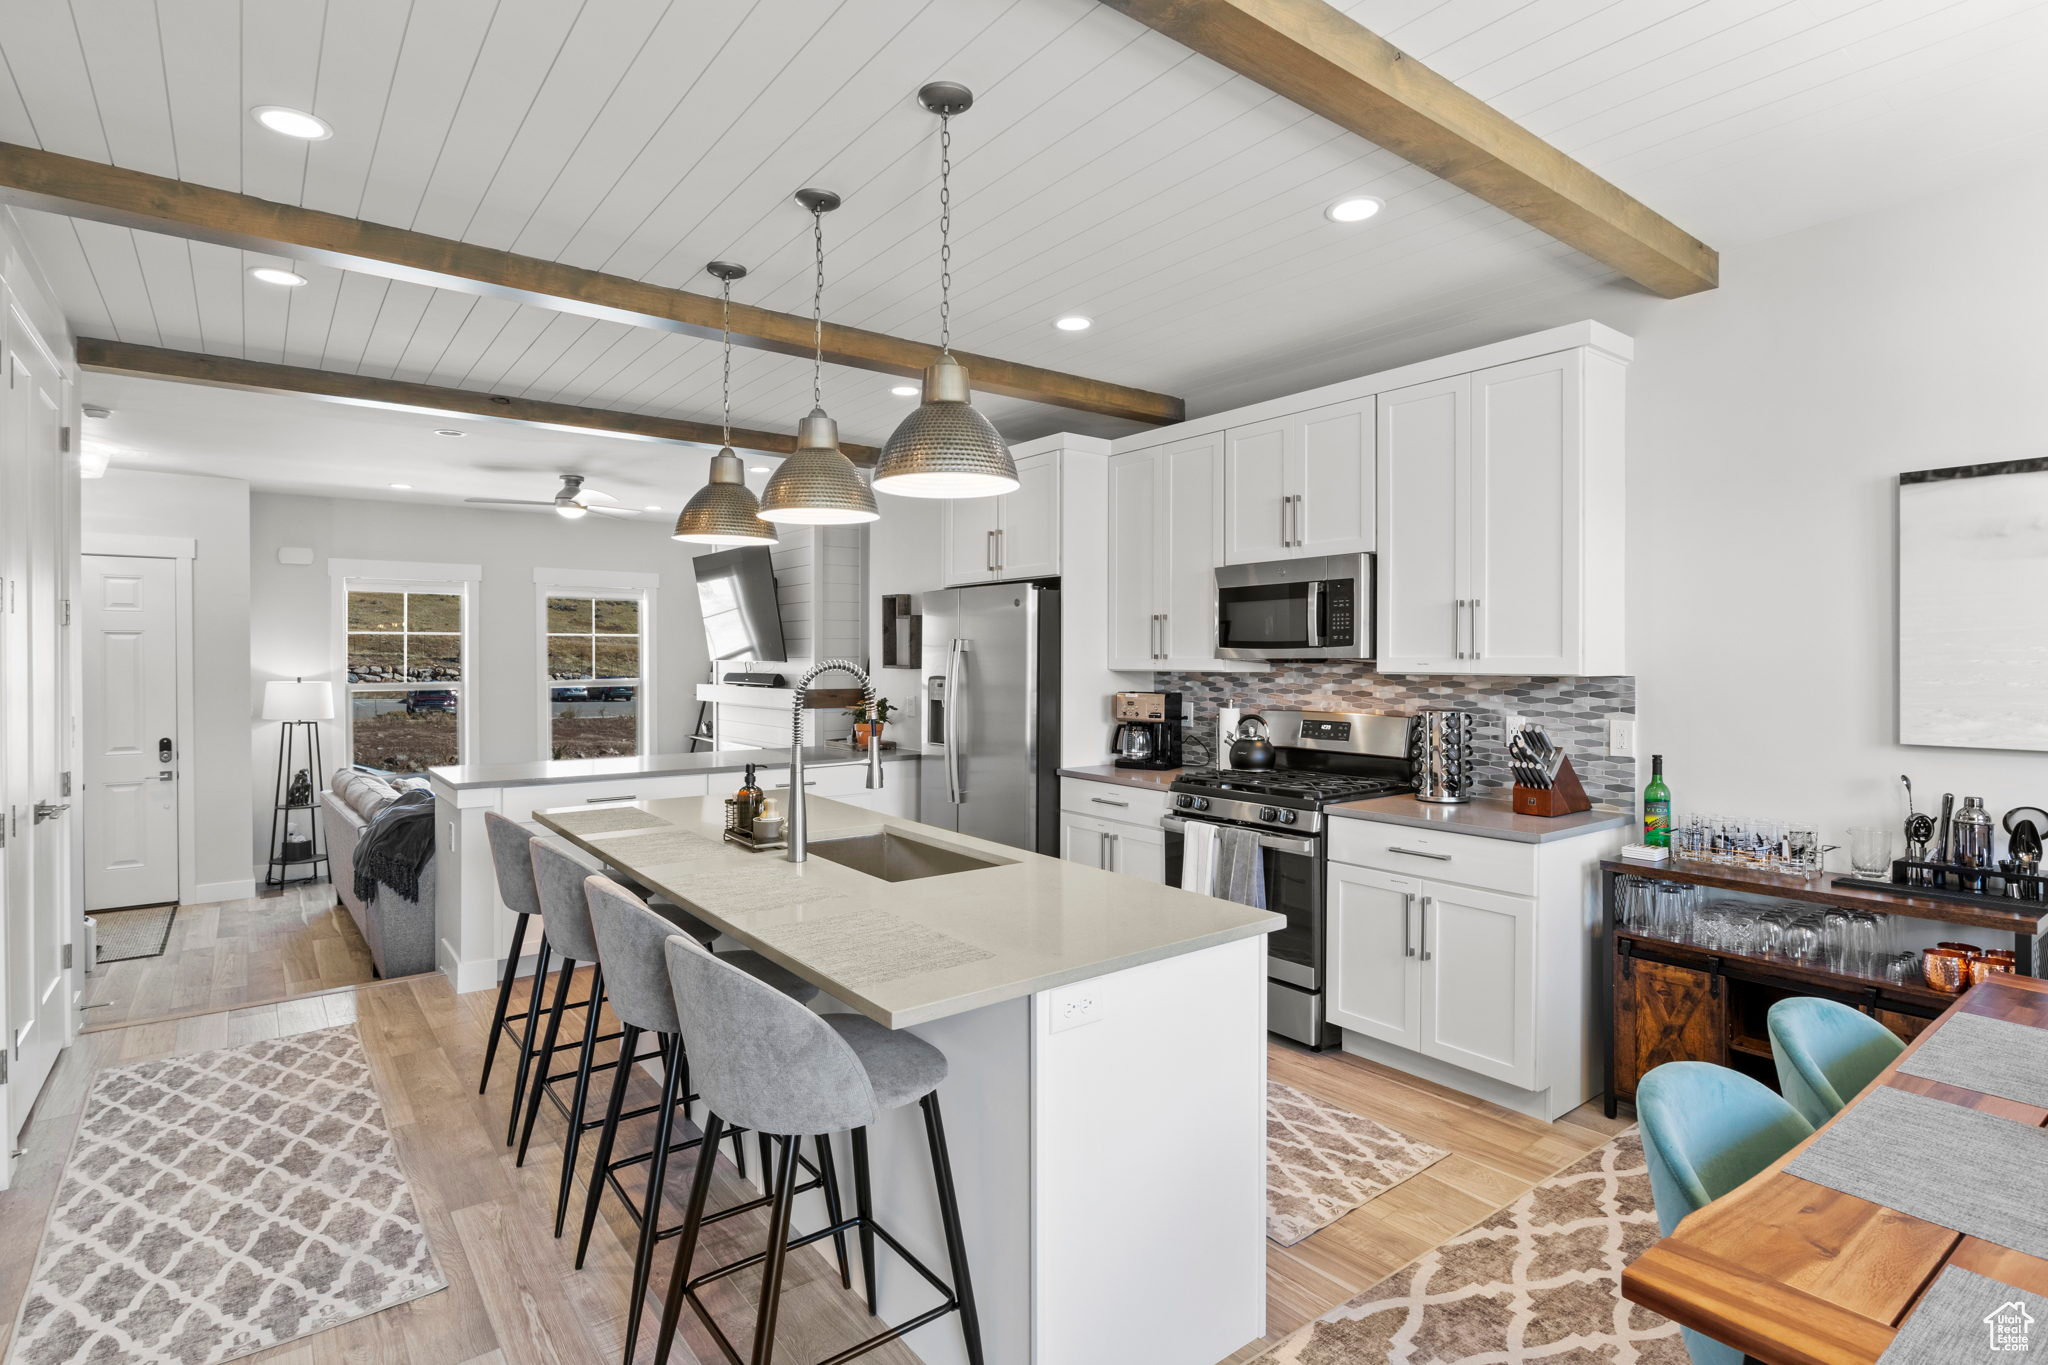 Kitchen with pendant lighting, appliances with stainless steel finishes, beam ceiling, and a kitchen bar